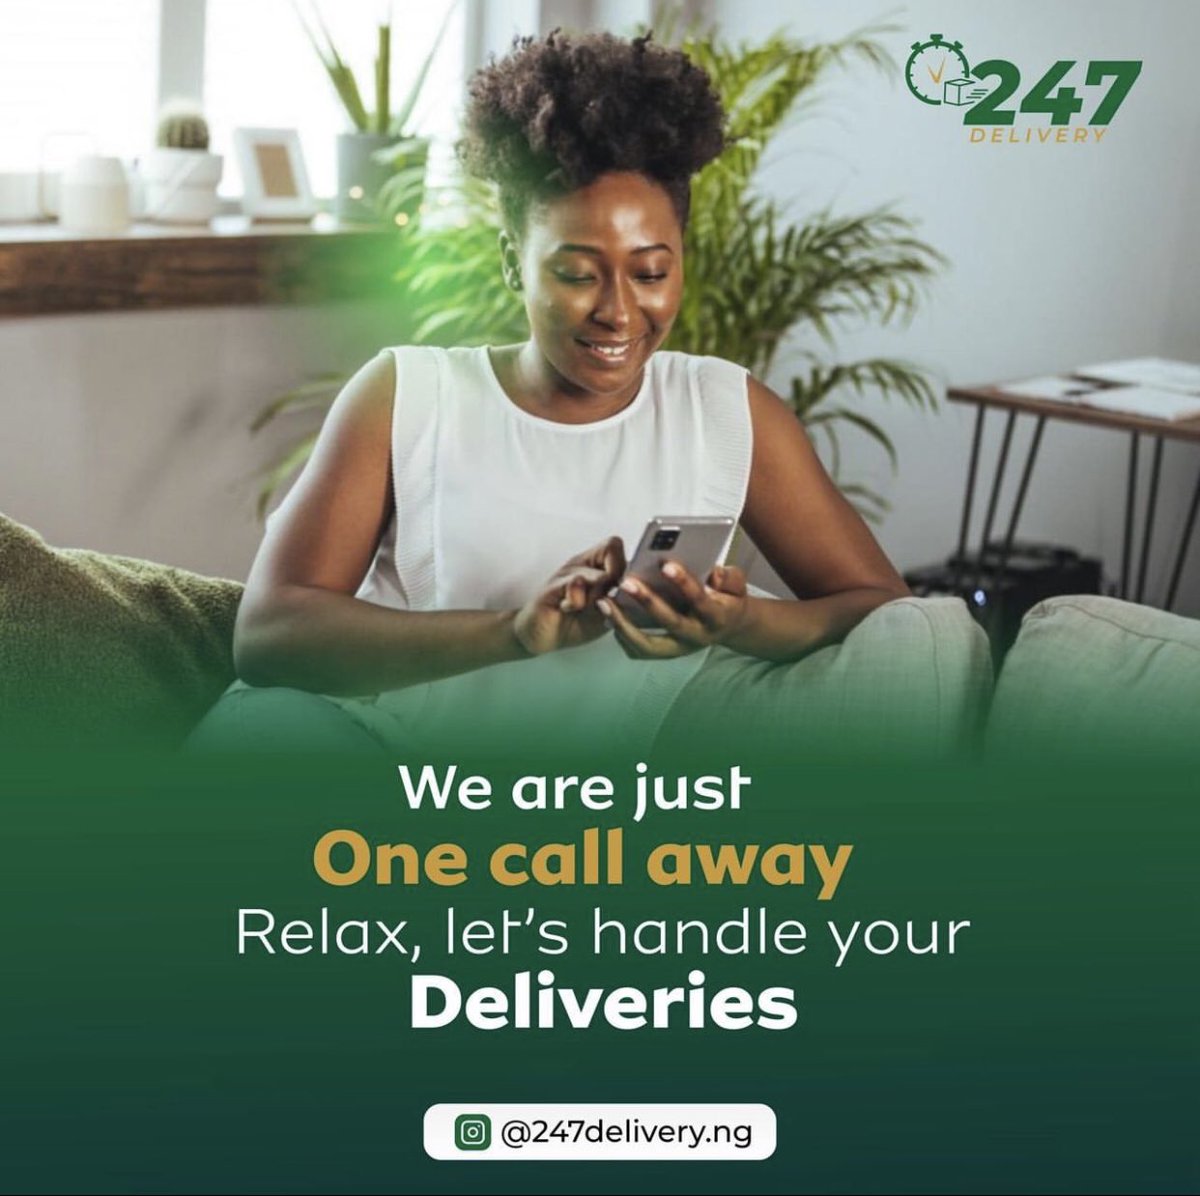 247 Delivery is your stress-free delivery solution! 

We've got your back, so sit back, relax, and leave the deliveries to us. 
#247delivery #stressfreedelivery